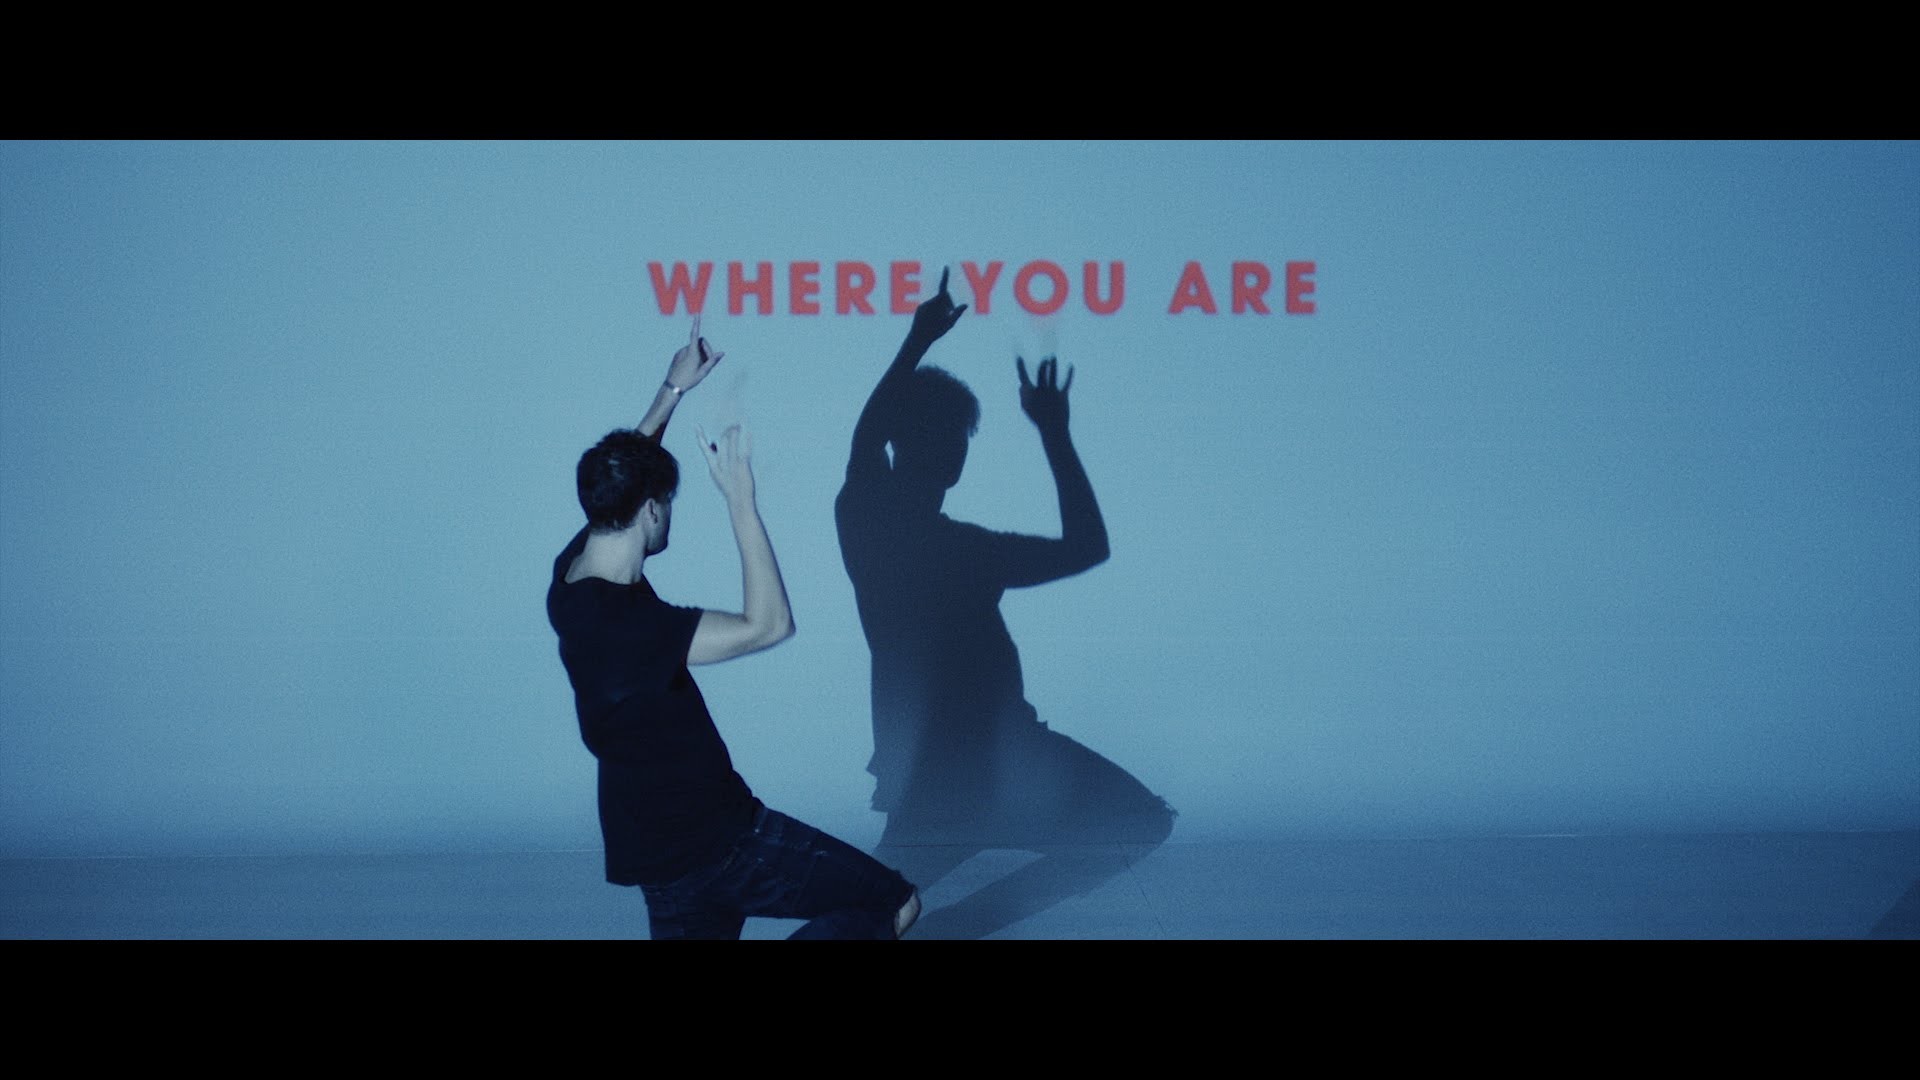 1920x1080 Where You Are (Music Video) - Hillsong Young & Free